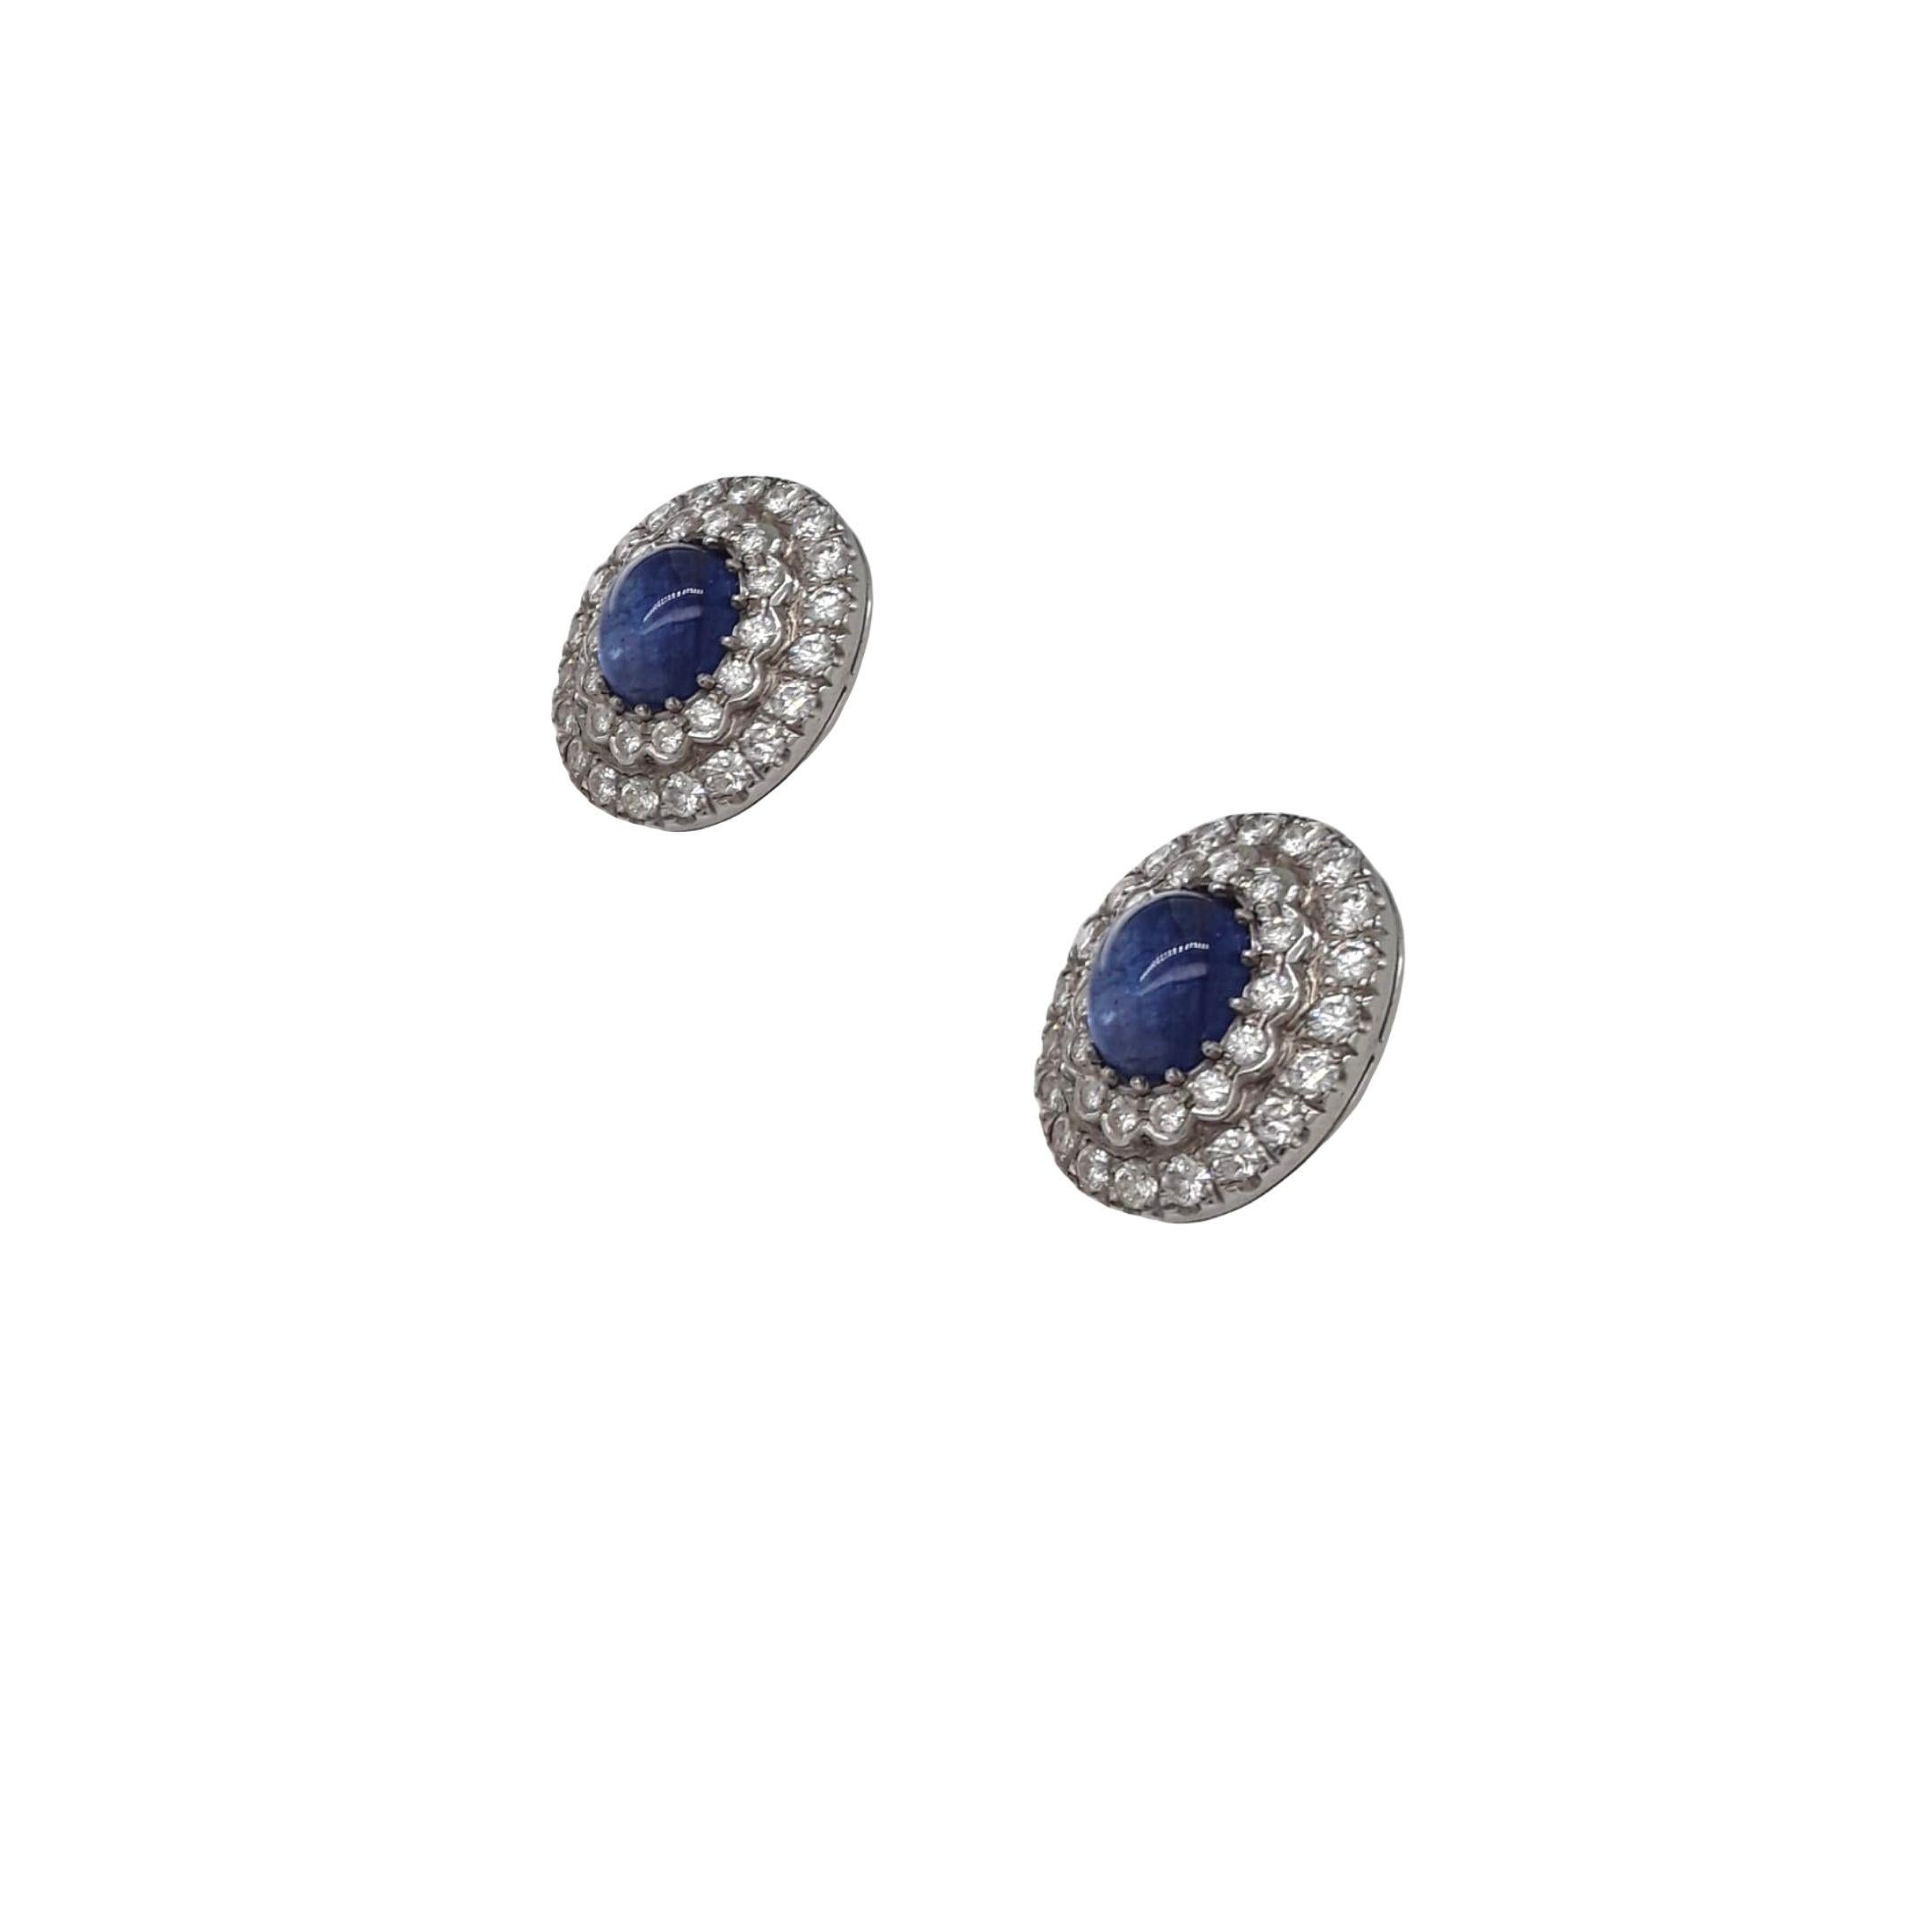 Antique Style Diamond and Sapphire Earrings made with natural sapphires and brilliant cut diamonds. Sapphire Quantity: 2 oval sapphires, Sapphire Total Weight: 8.40 carats. Diamond Quantity: 68 (round diamonds), Diamond total Weight: 2.84 carats,